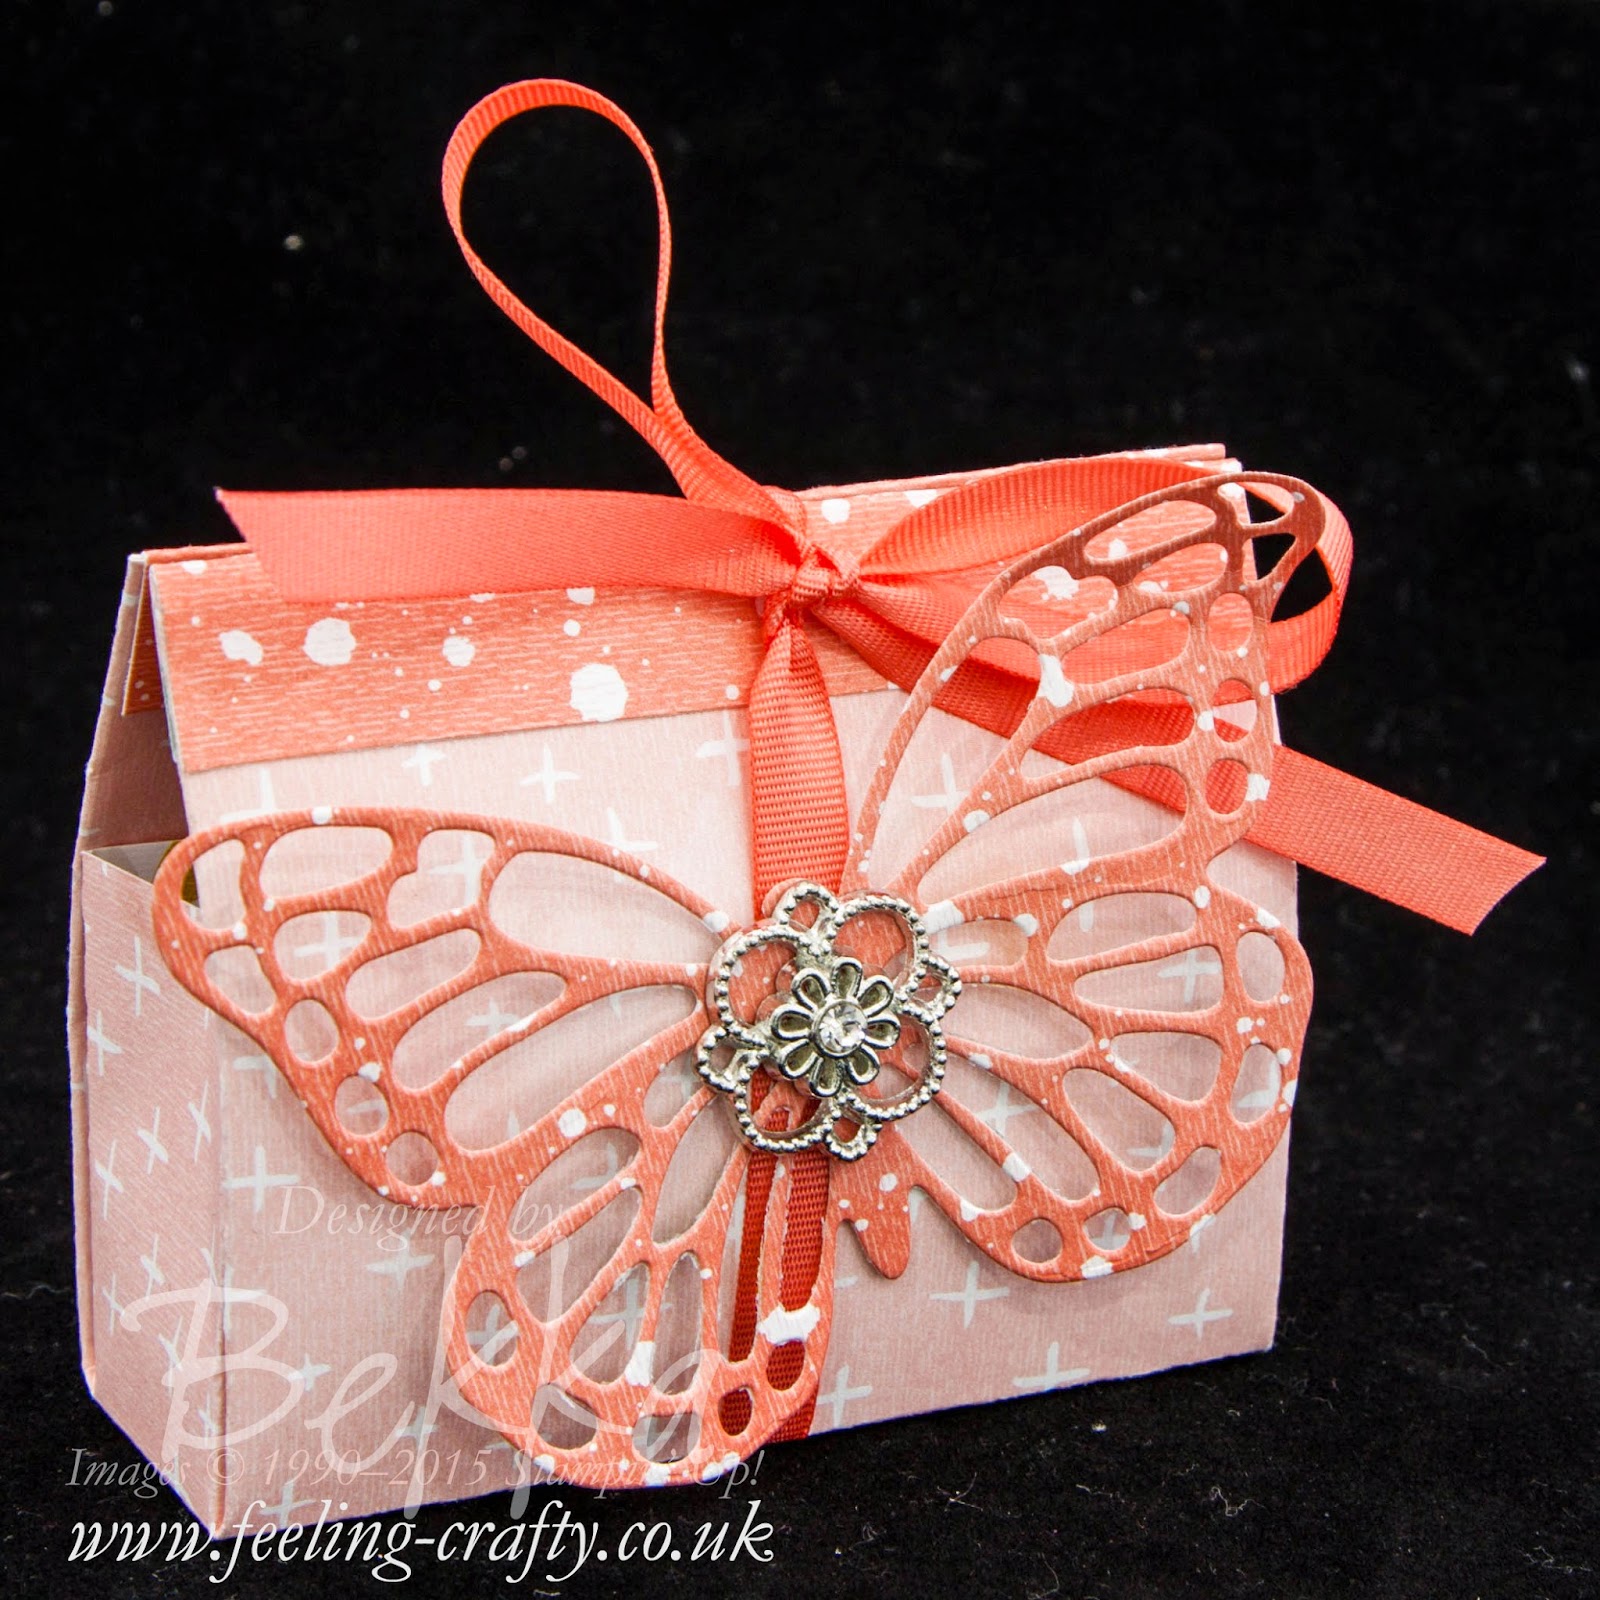 Butterfly Basics Gift Bag - check out this blog for lots of great ideas